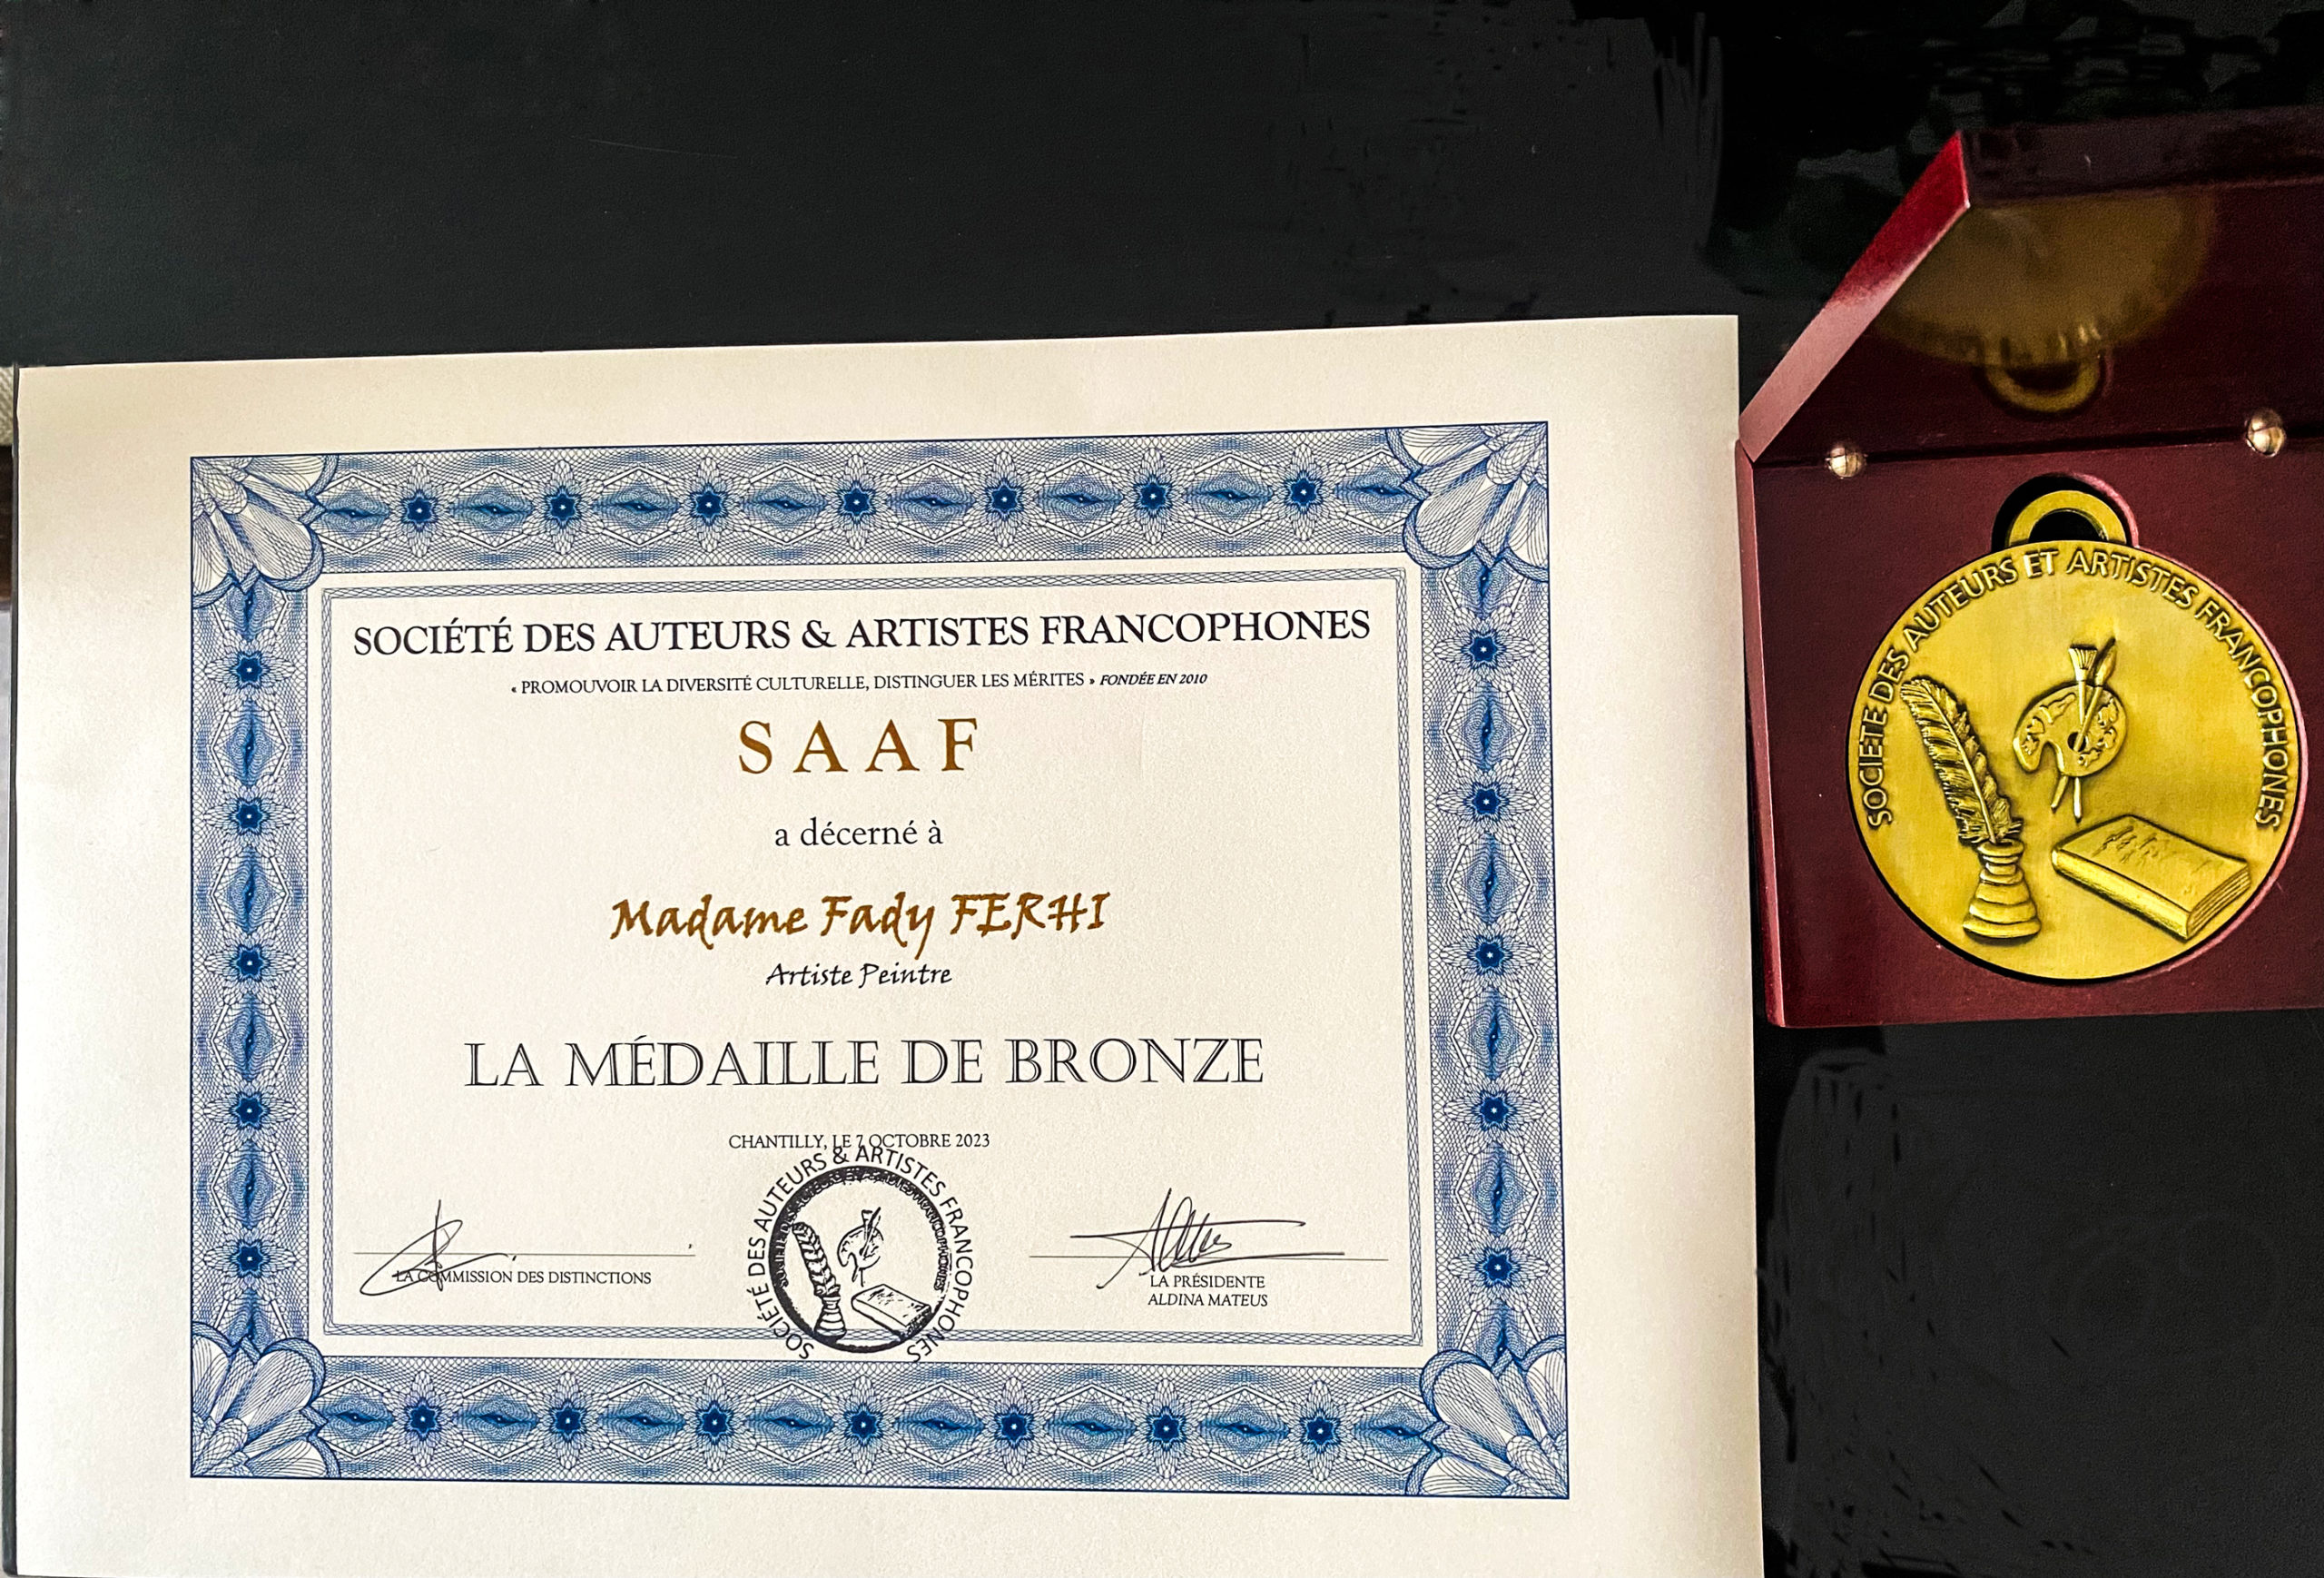 Fady-Ferhi-Originality-and-Distinctive-Style-Contemporary-Artist-received-Honoree-Award-by-SAAF-DN-AFRICA-MEDIA-PARTNER